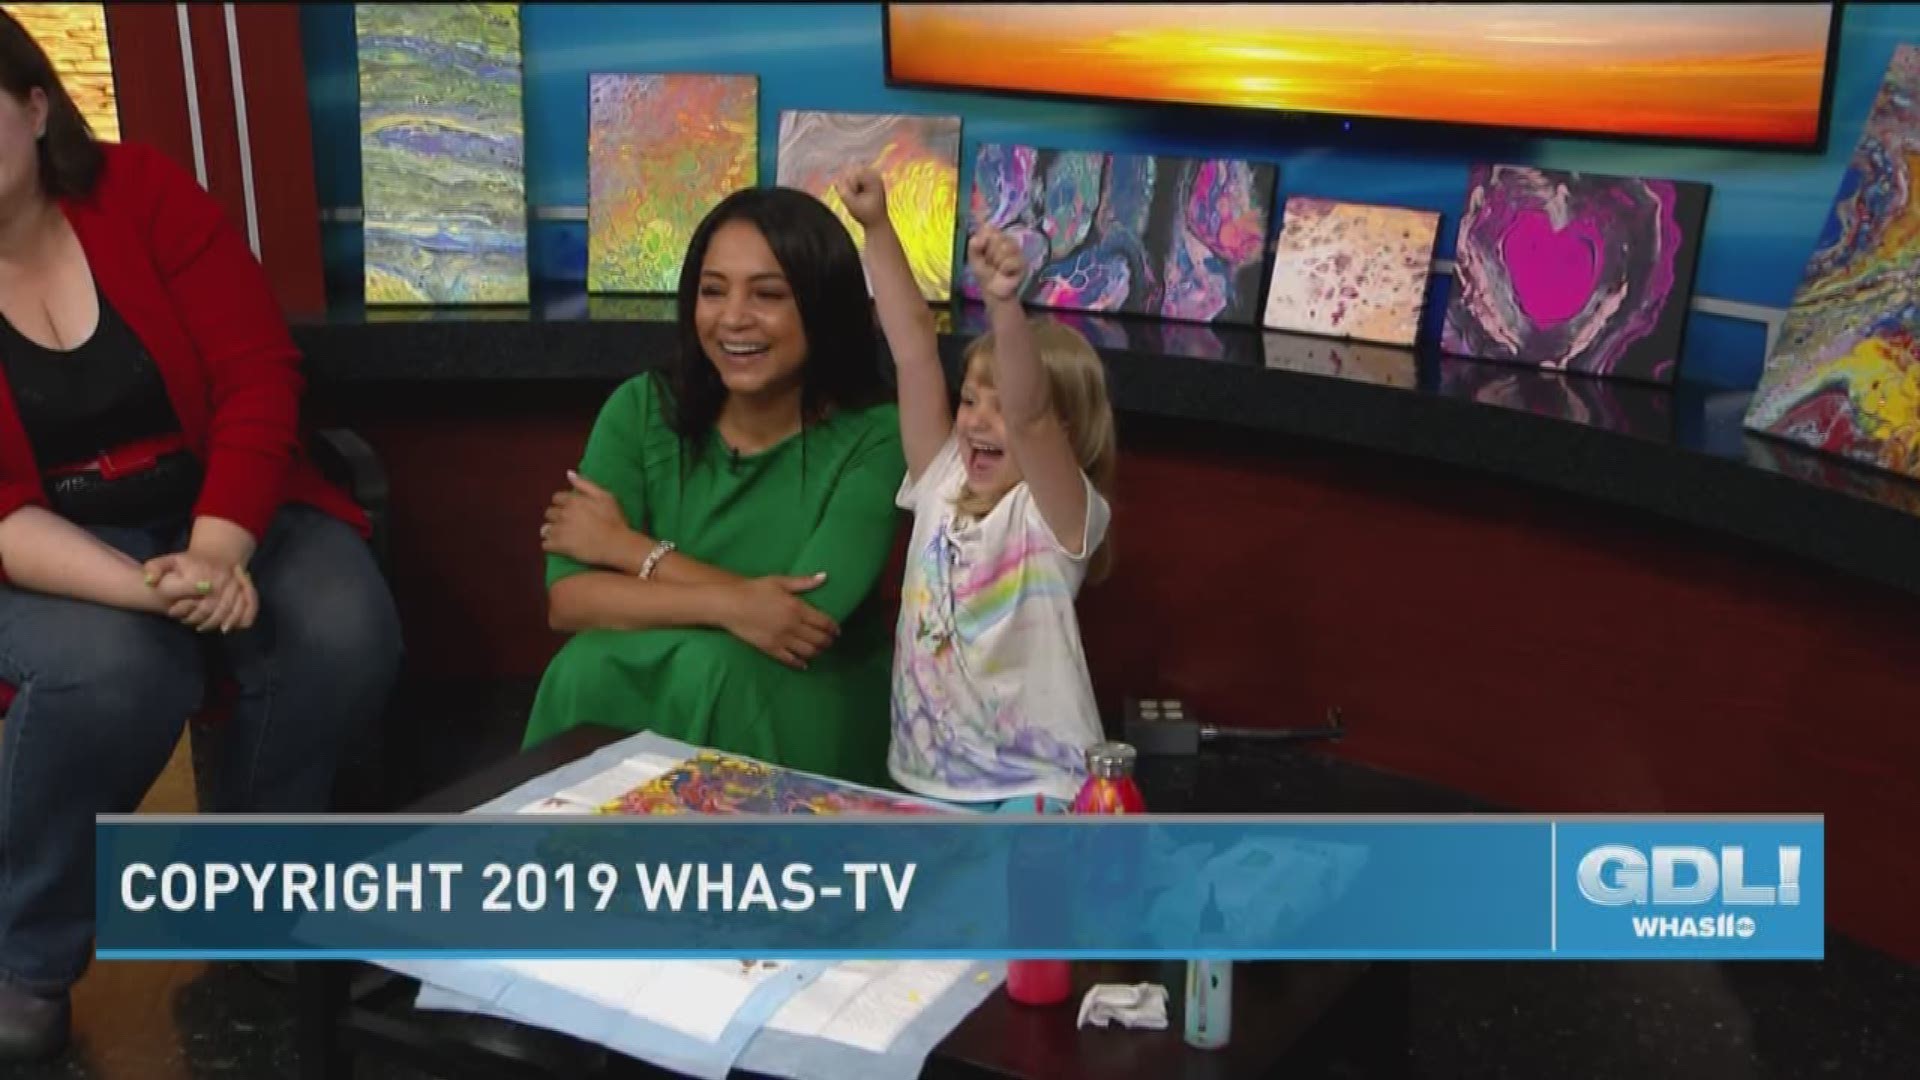 From the ripe old age of 6, Mikayla Harbeson mastered the art of acrylic paint pouring. Now 7 years old, she has continued honing her craft while also teaching others, including her sister and friends.